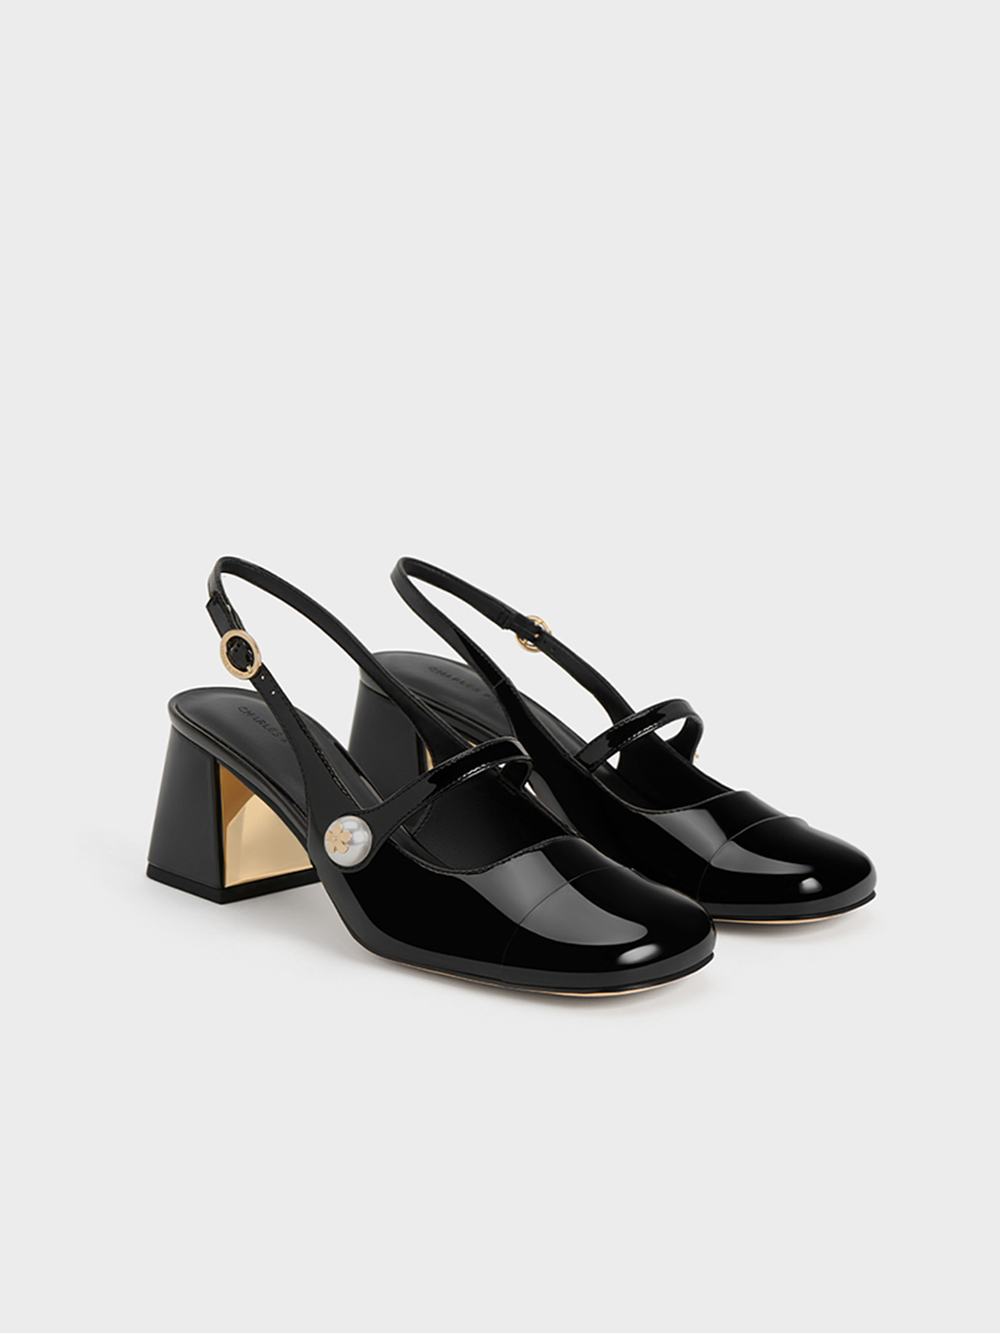 Women’s Black Patent Pearl Embellished Trapeze-Heel Slingback Pumps - CHARLES & KEITH